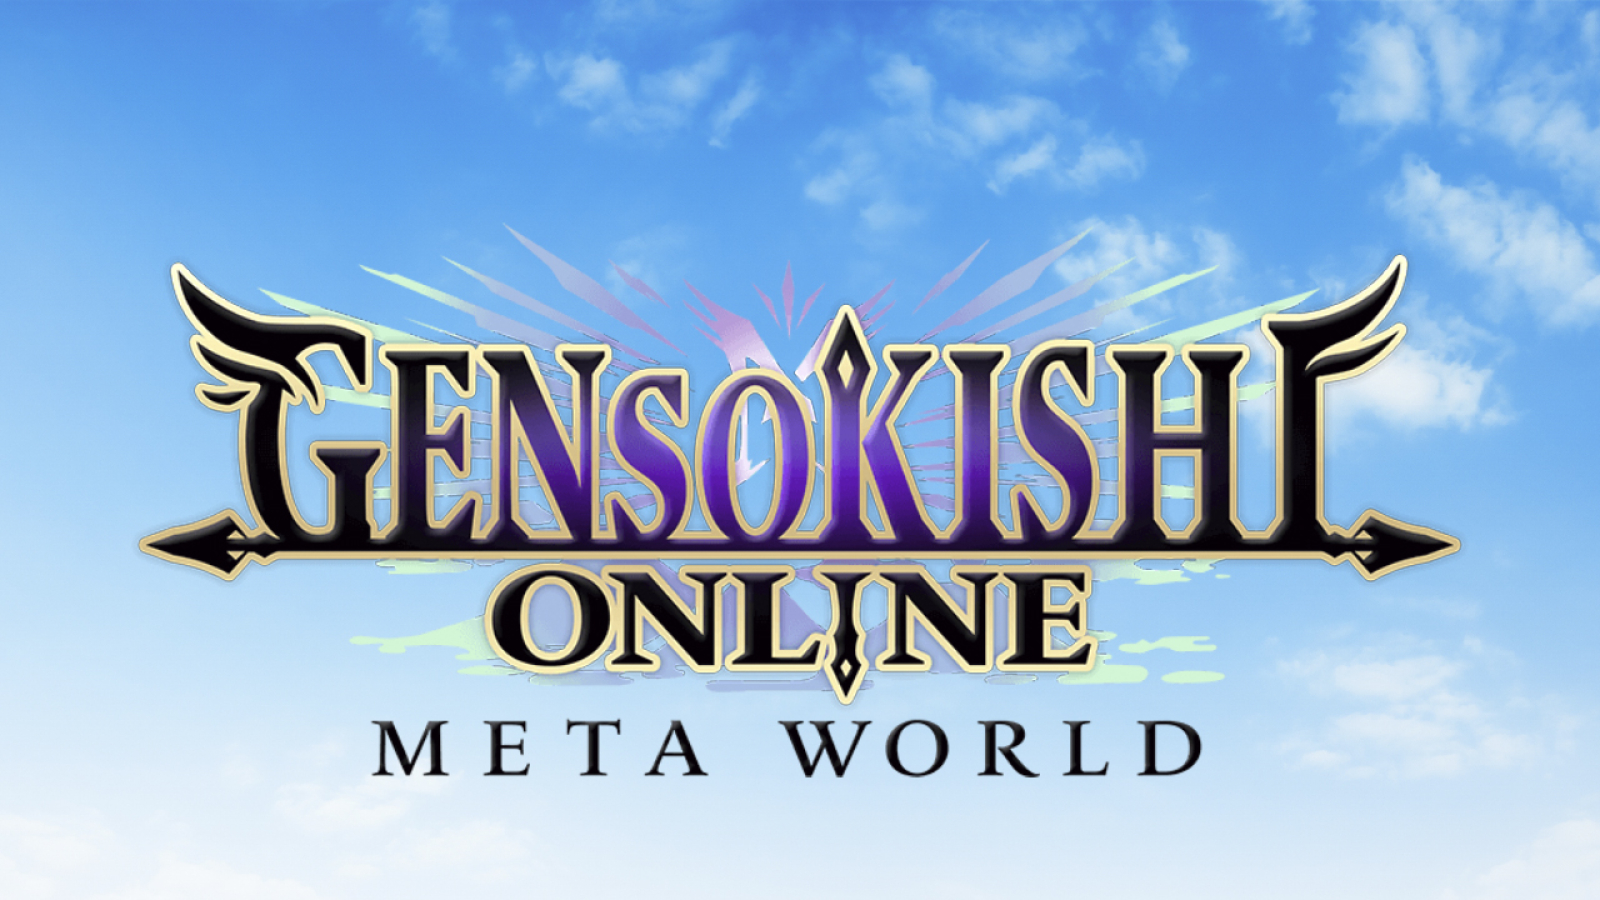 Gensokishi Online Announces a Whitelist with a Total Value of $10,000, Winners Can Purchase at Private Sale Price